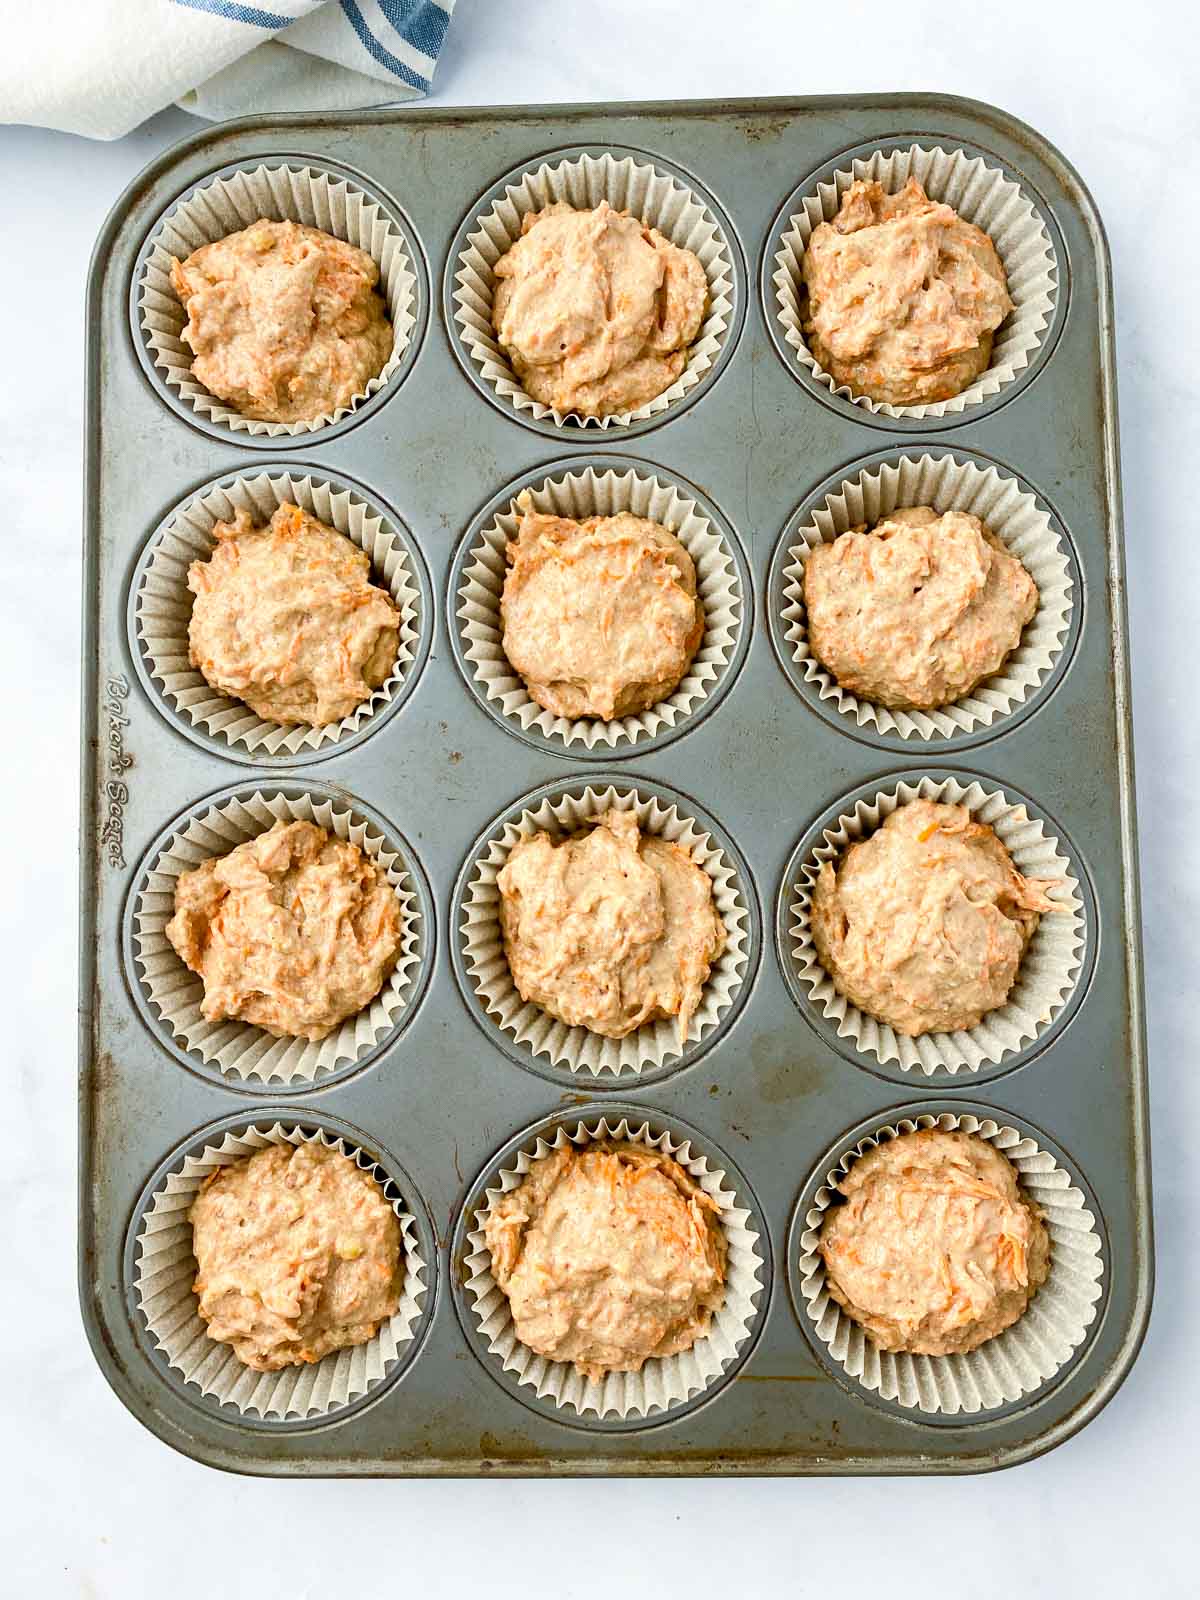 Muffin batter in cupcake pan lined with parchment baking papers.